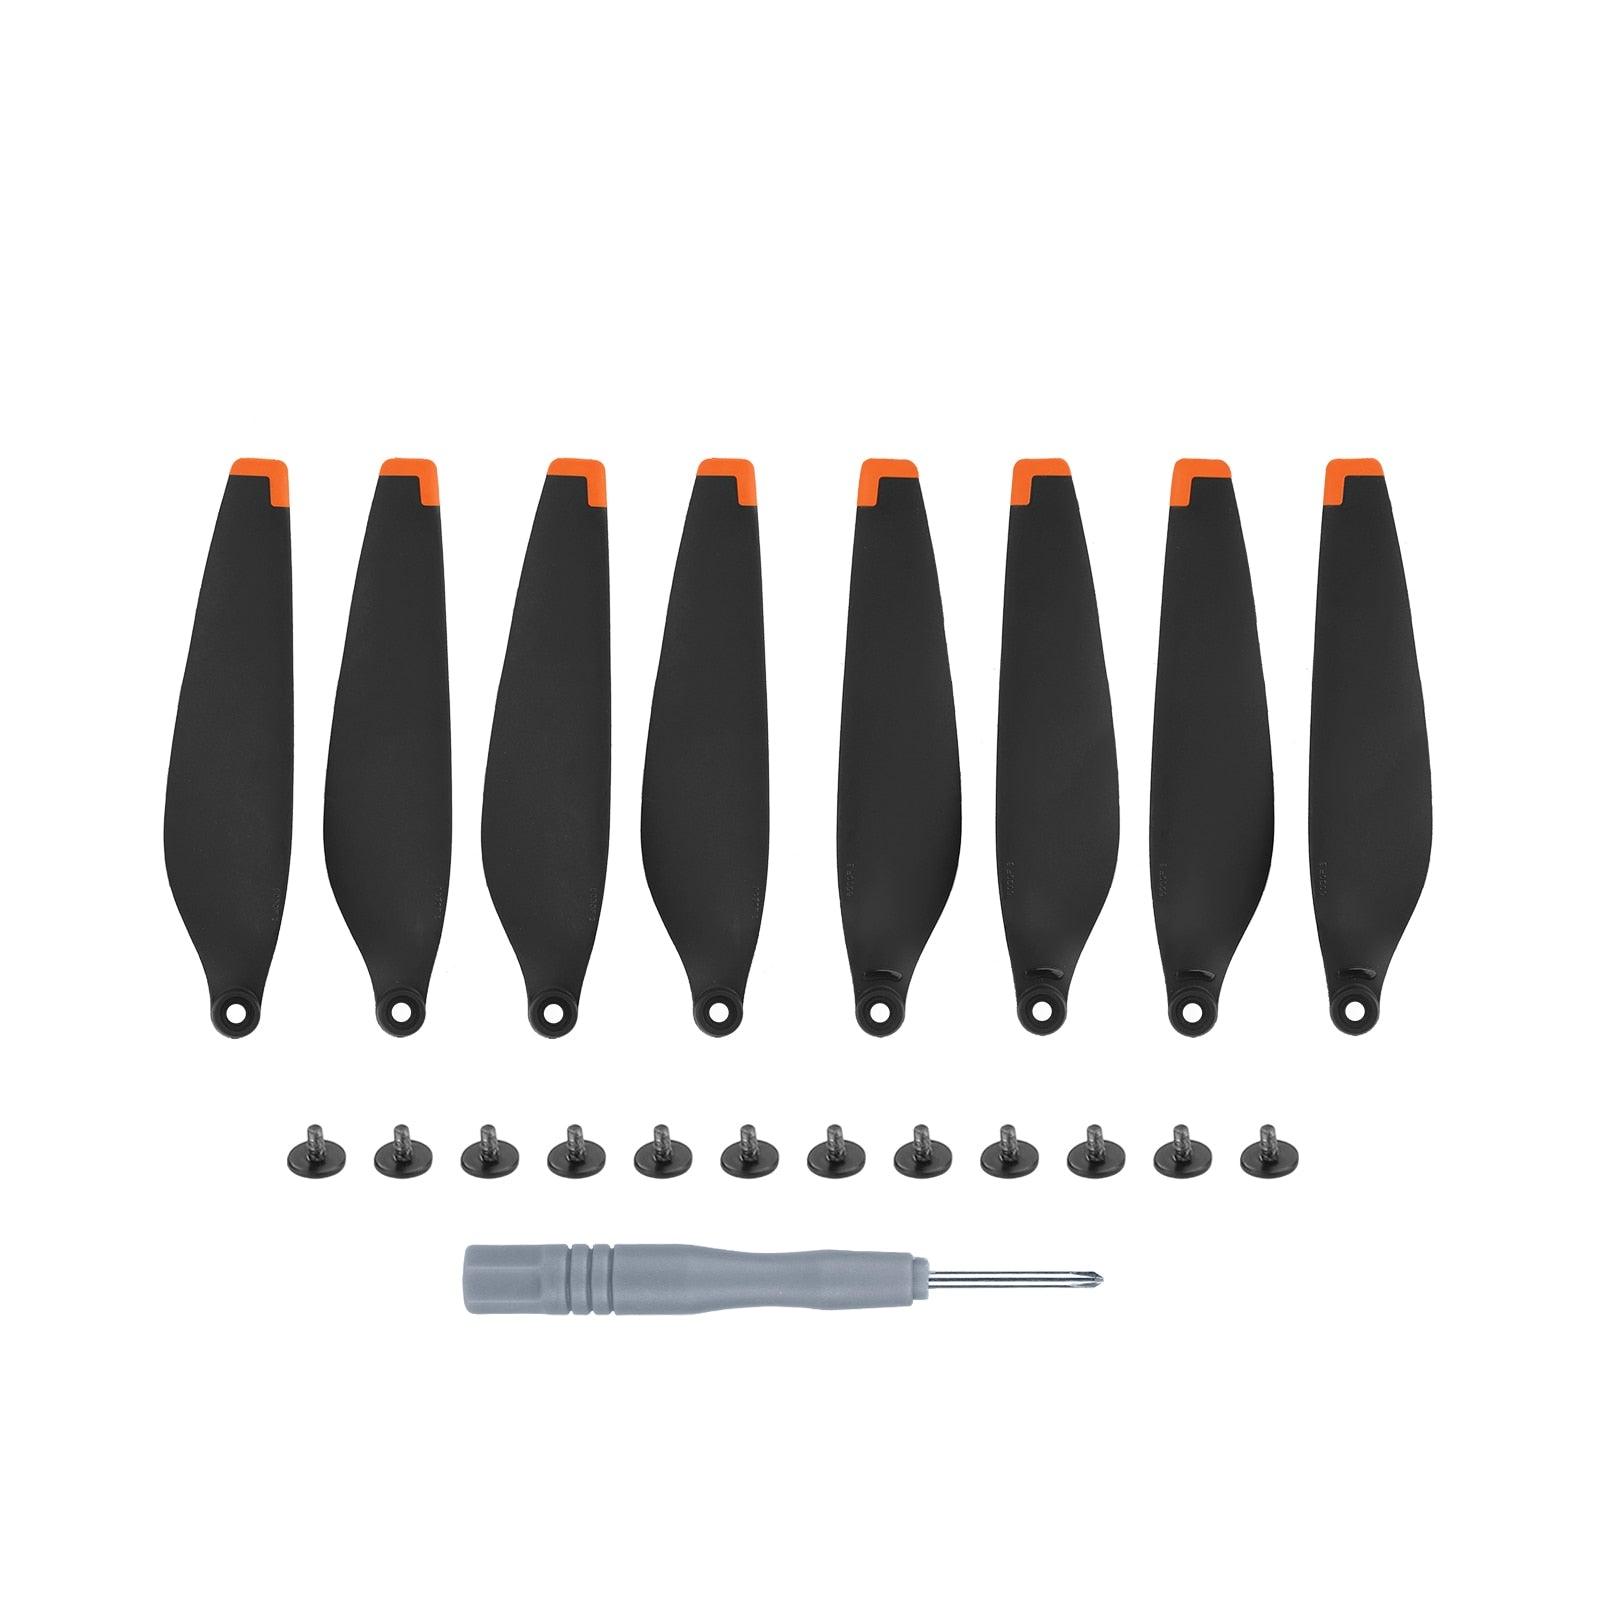 DJI Mini 3 Propellers Compatible with DJI Mini 3 pro Drone Replacement Low-Noise and Quick-Release Blades Props Accessories - RCDrone